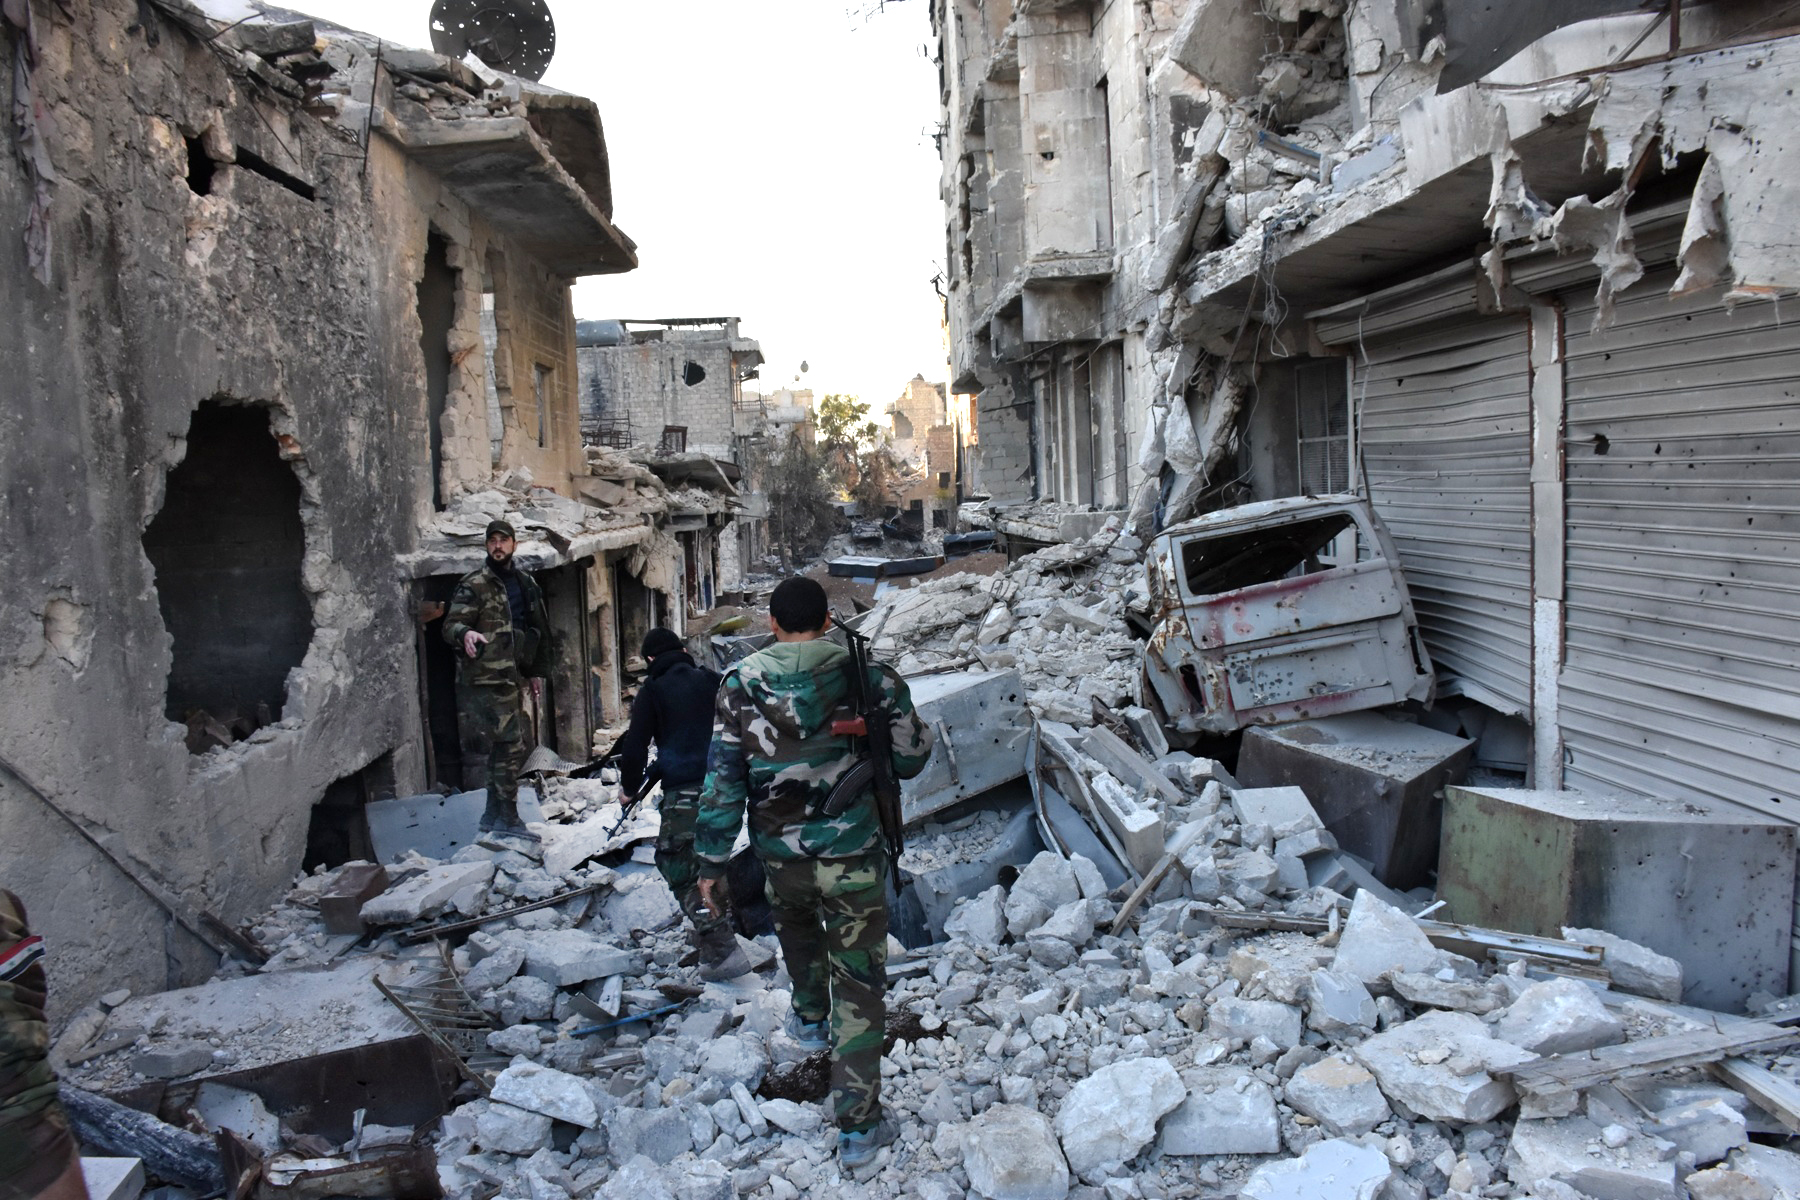 Syrian pro-government forces walk amidst heavy destruction in Aleppo's Bustan al-Basha neighbourhood on November 28, 2016, during their assault to retake the entire northern city from rebel fighters. In a major breakthrough in the push to retake the whole city, regime forces captured six rebel-held districts of eastern Aleppo over the weekend, including Masaken Hanano, the biggest of those in eastern Aleppo.    / AFP PHOTO / GEORGE OURFALIAN